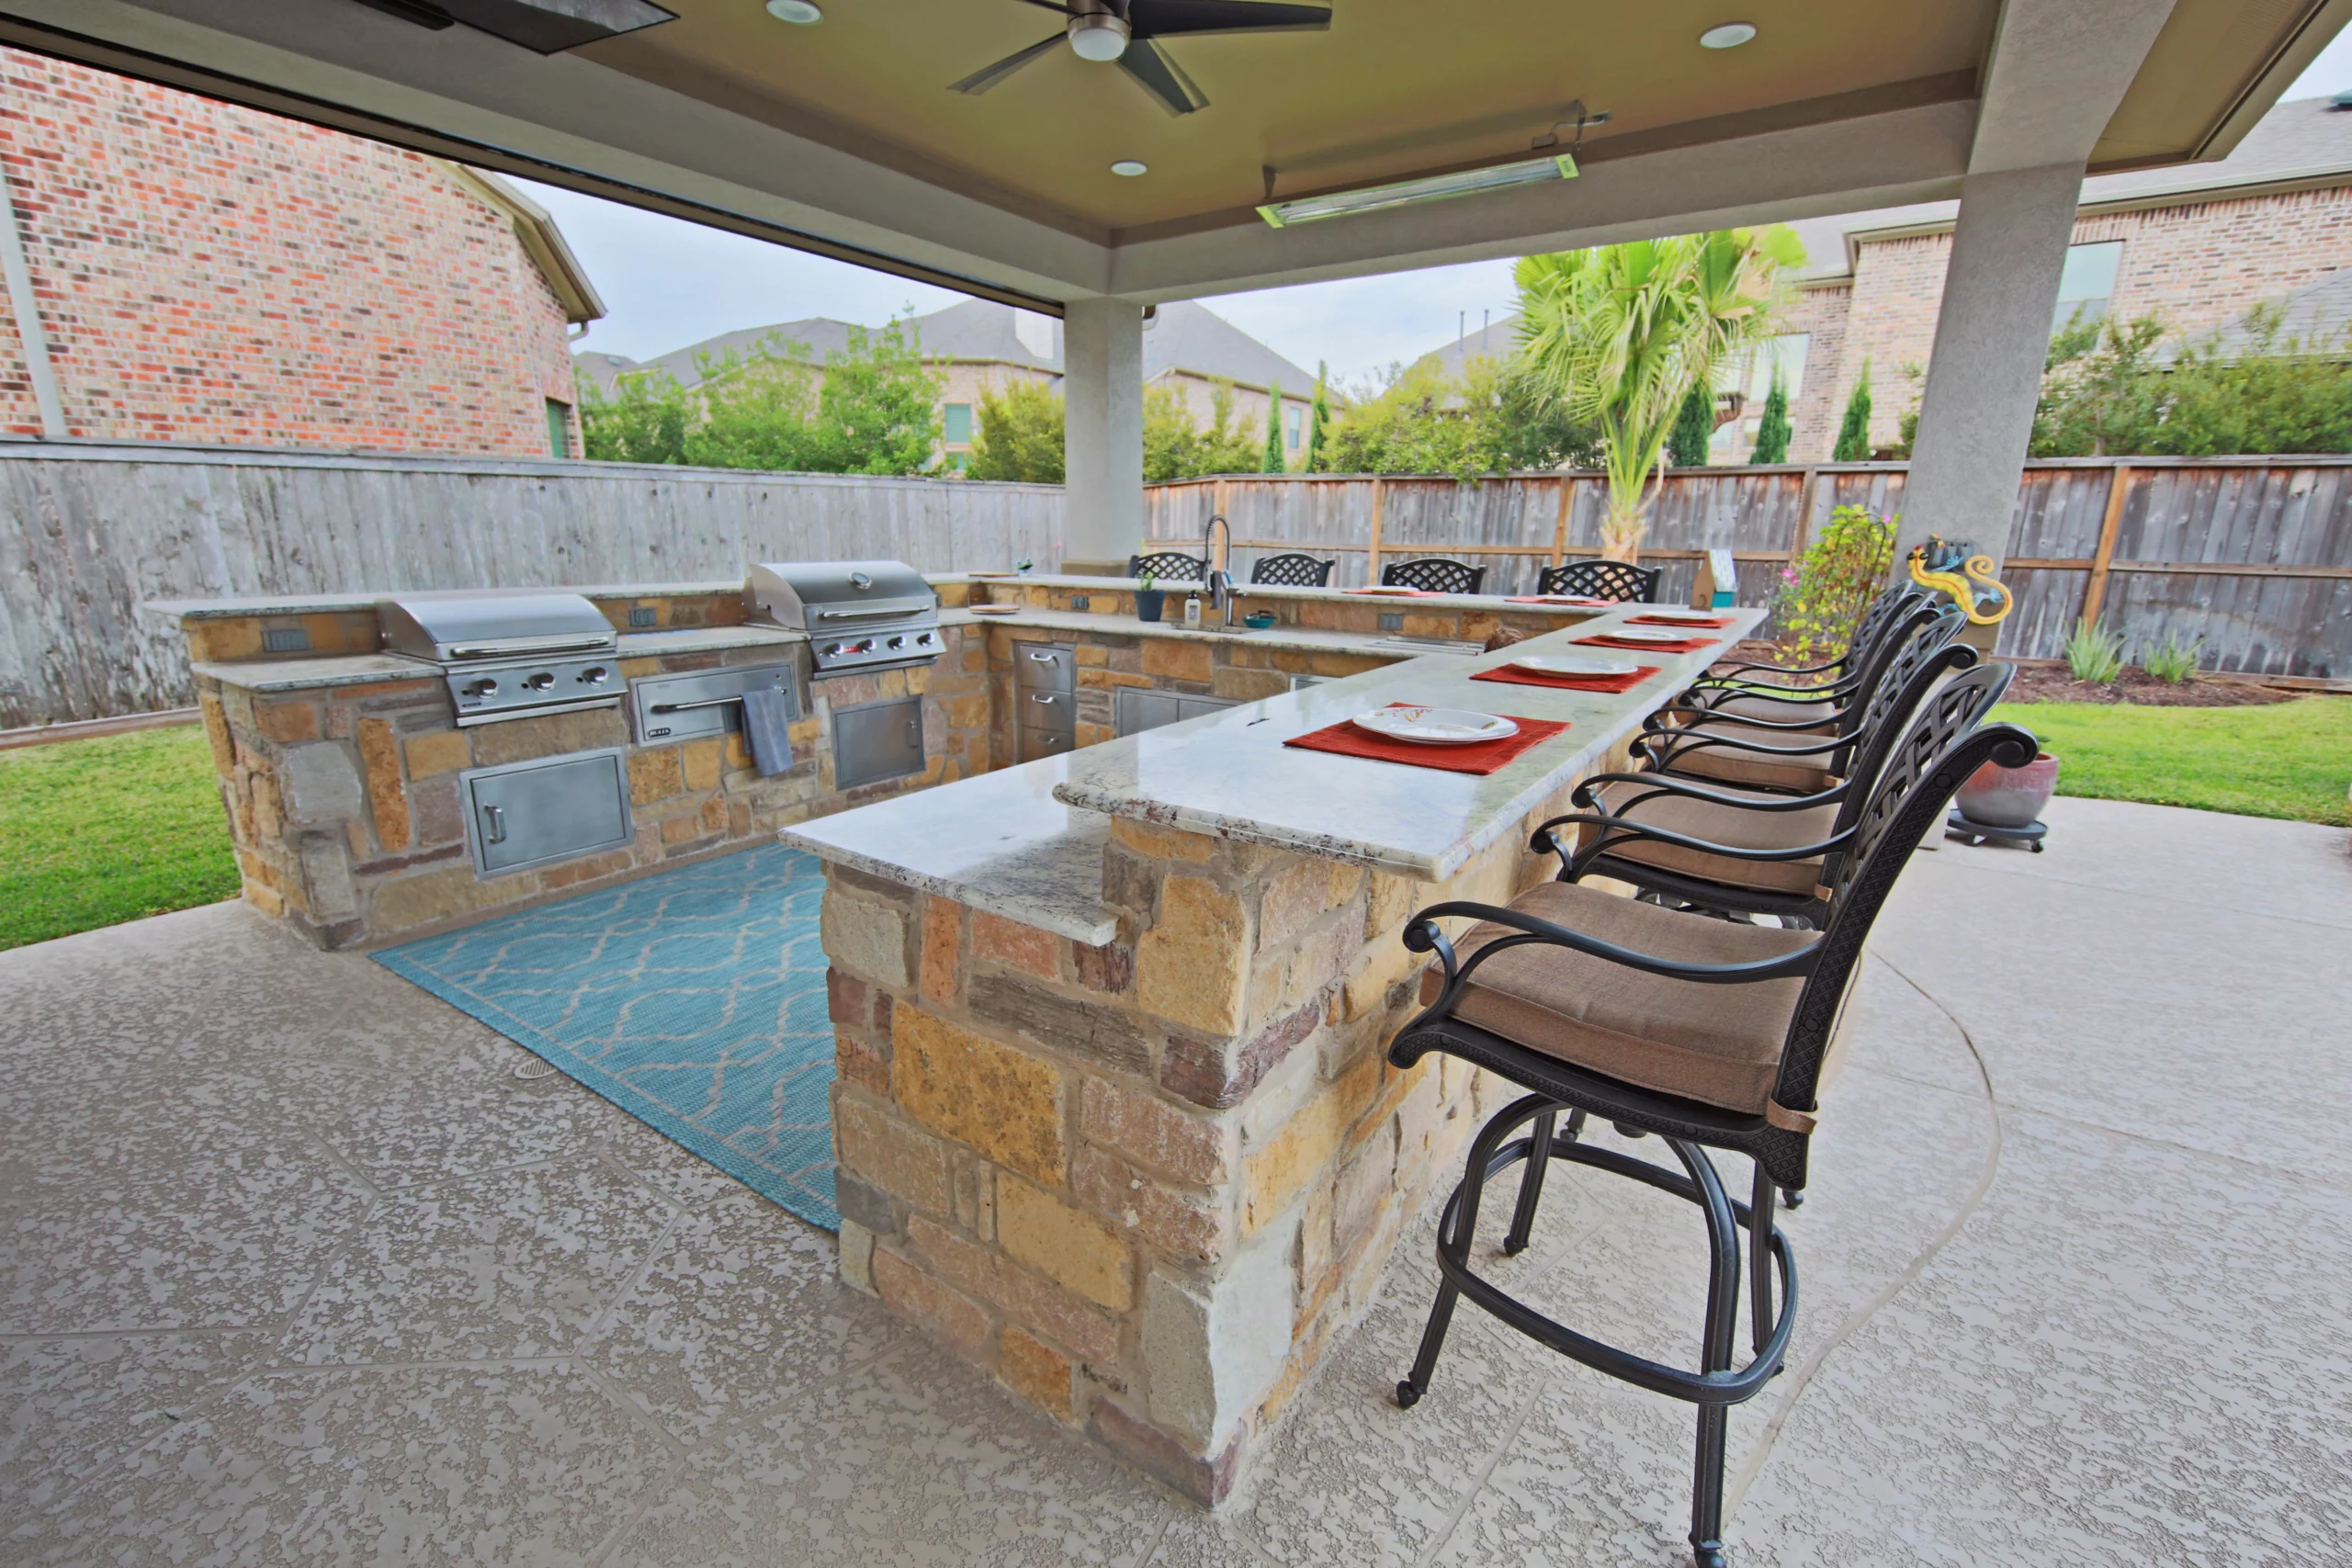 10 Important Considerations When Designing an Outdoor Kitchen